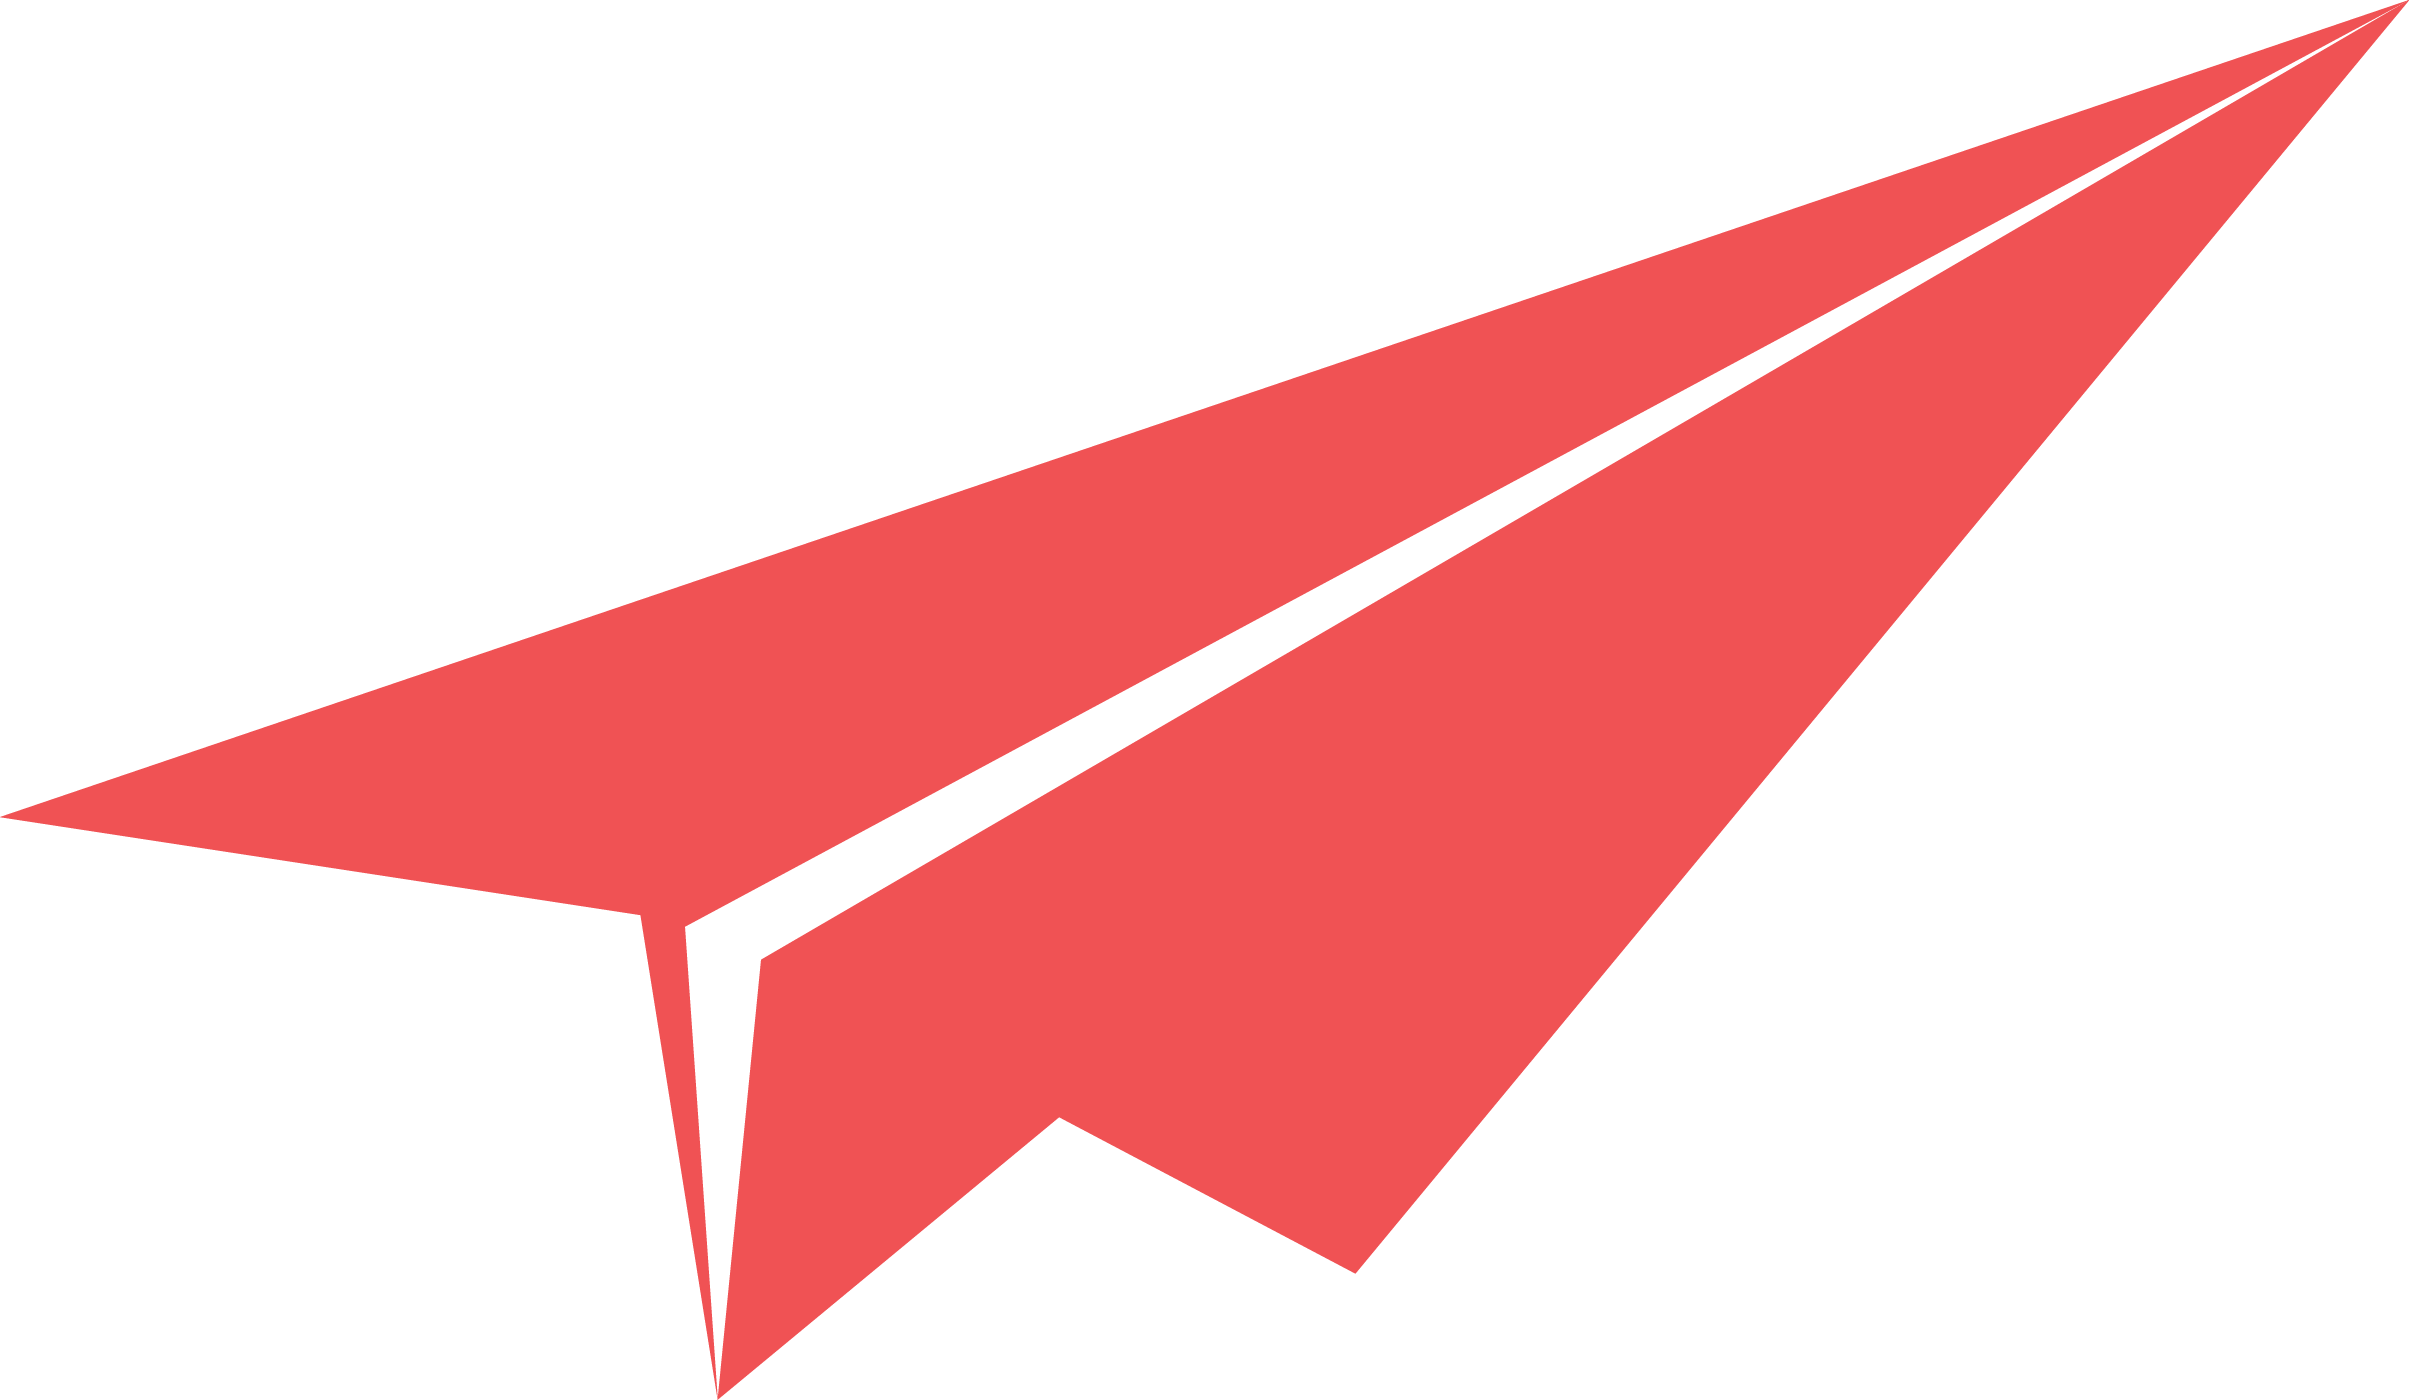 red paper plane image png #31526